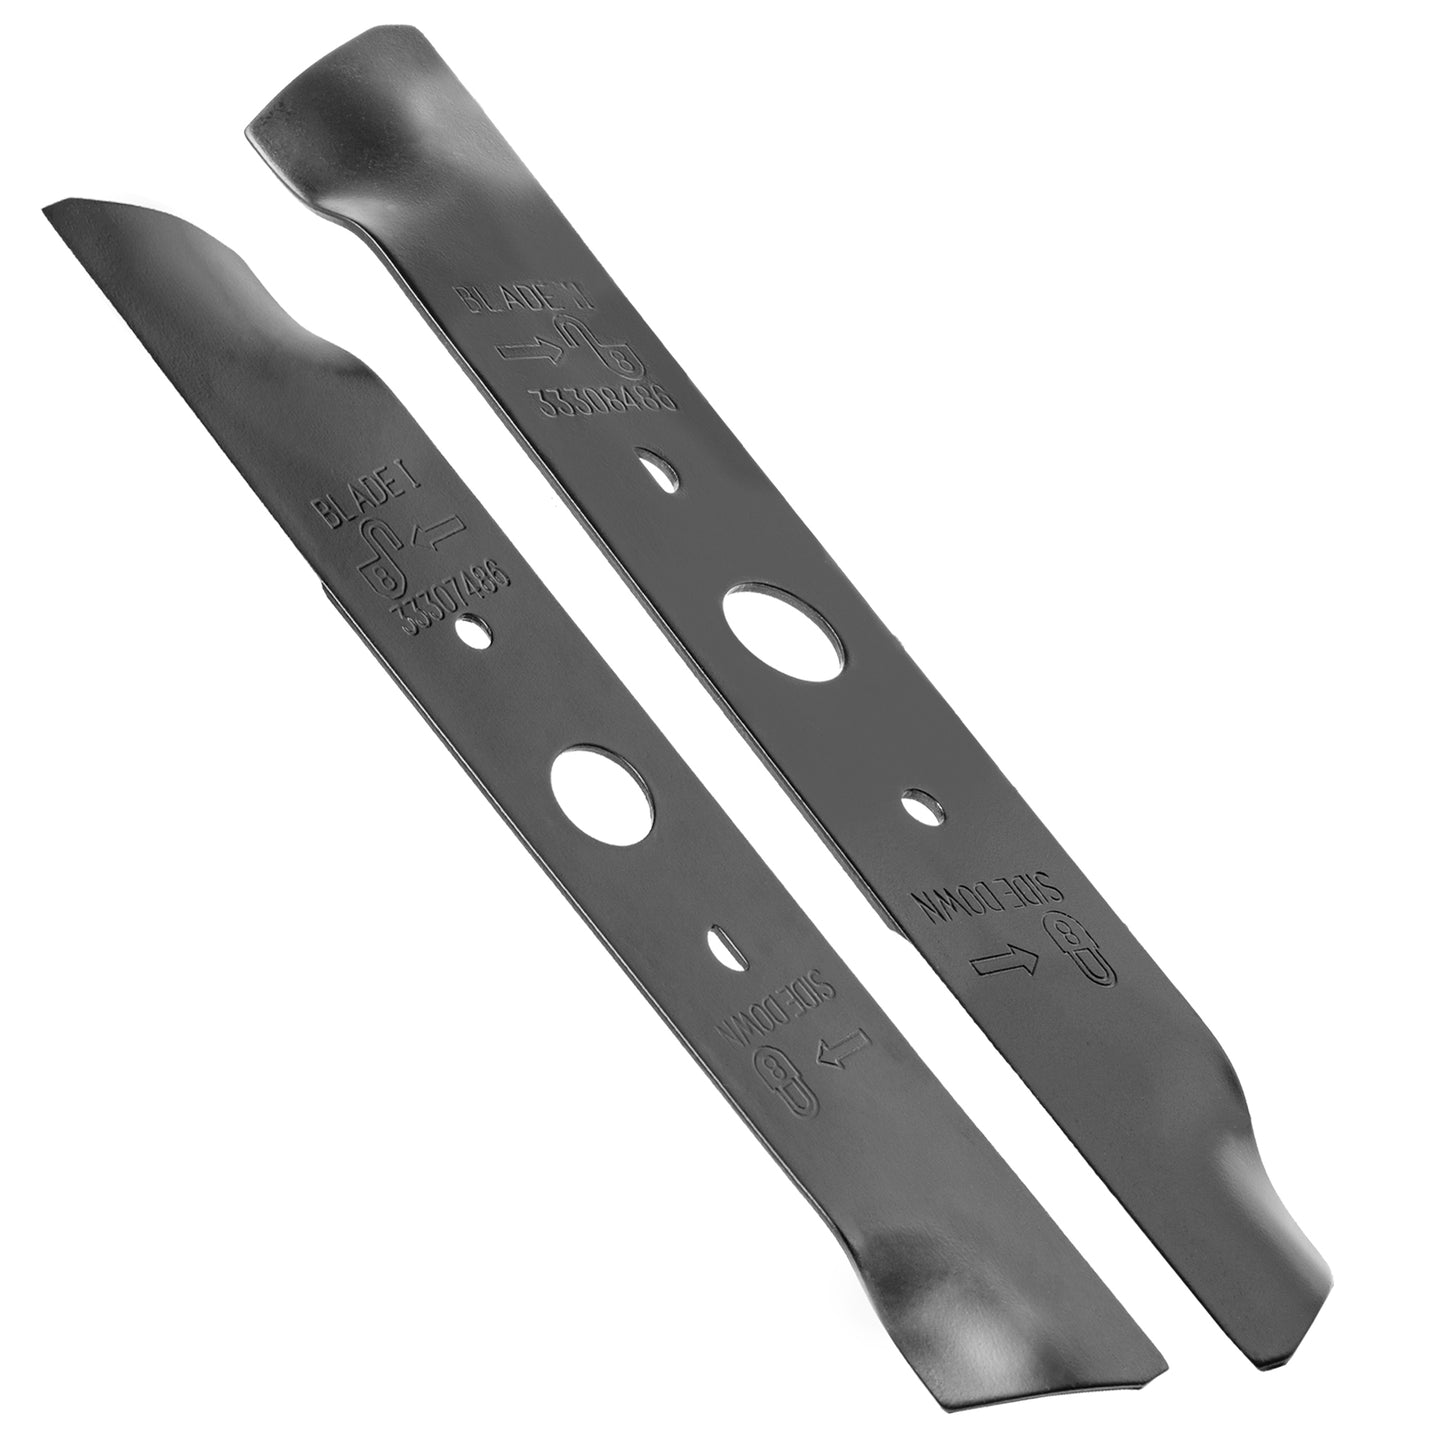 10" Replacement Lawn Mower Blades (2 Pack)